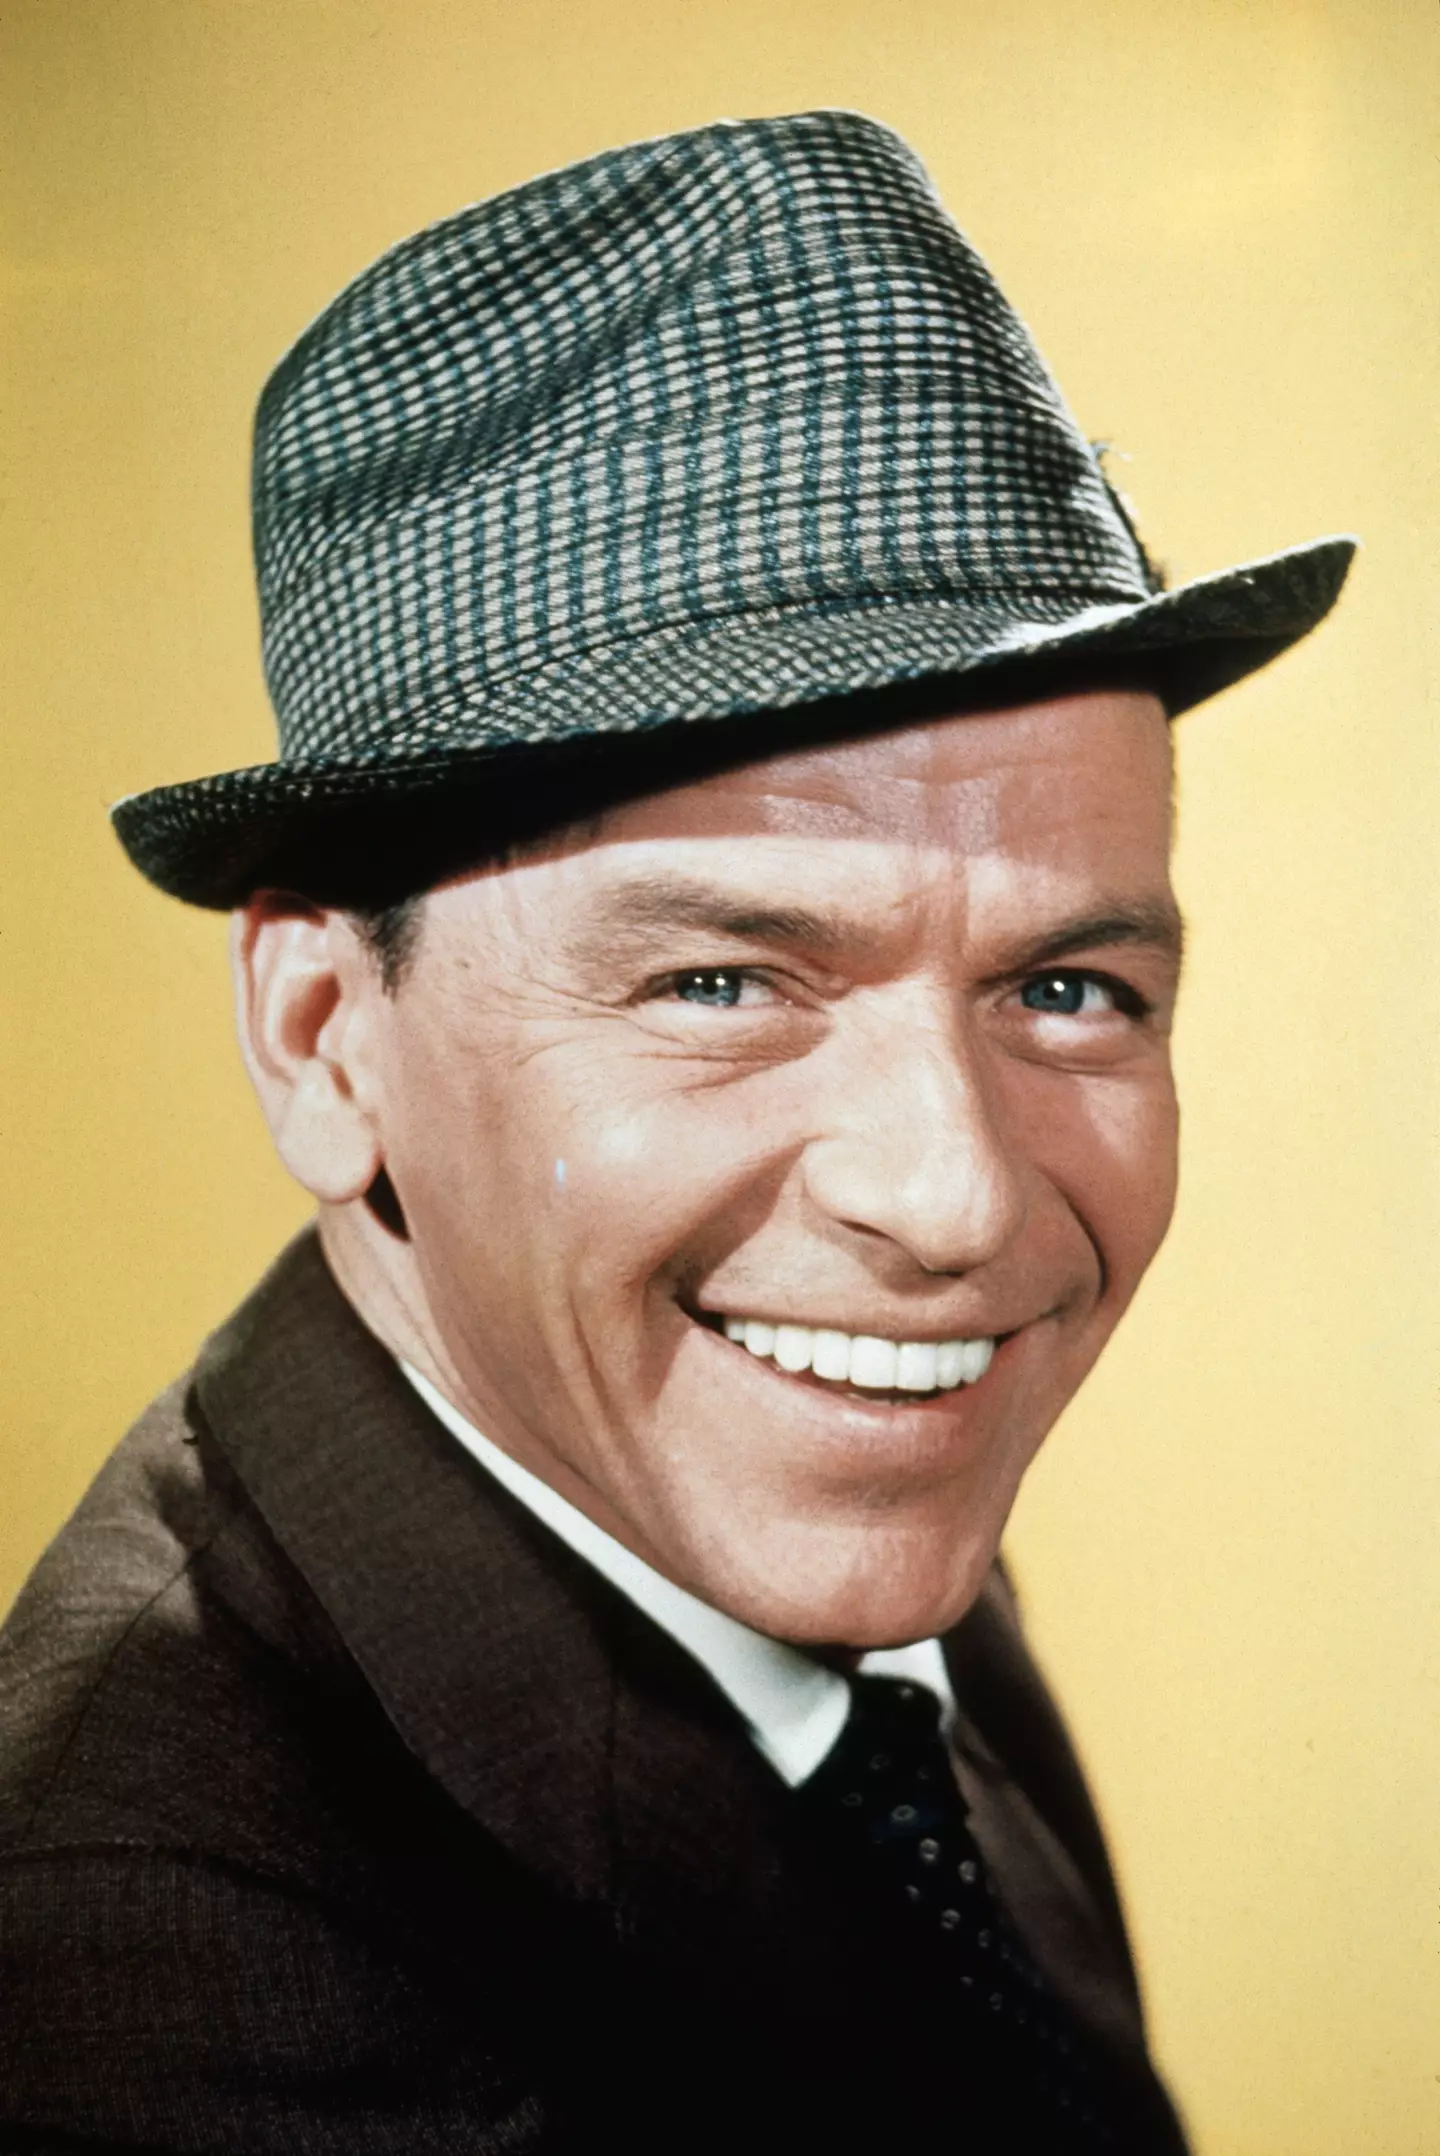 One of Frank Sinatra's biggest hits of all time has sparked a string of bizarre 'My Way' killings.